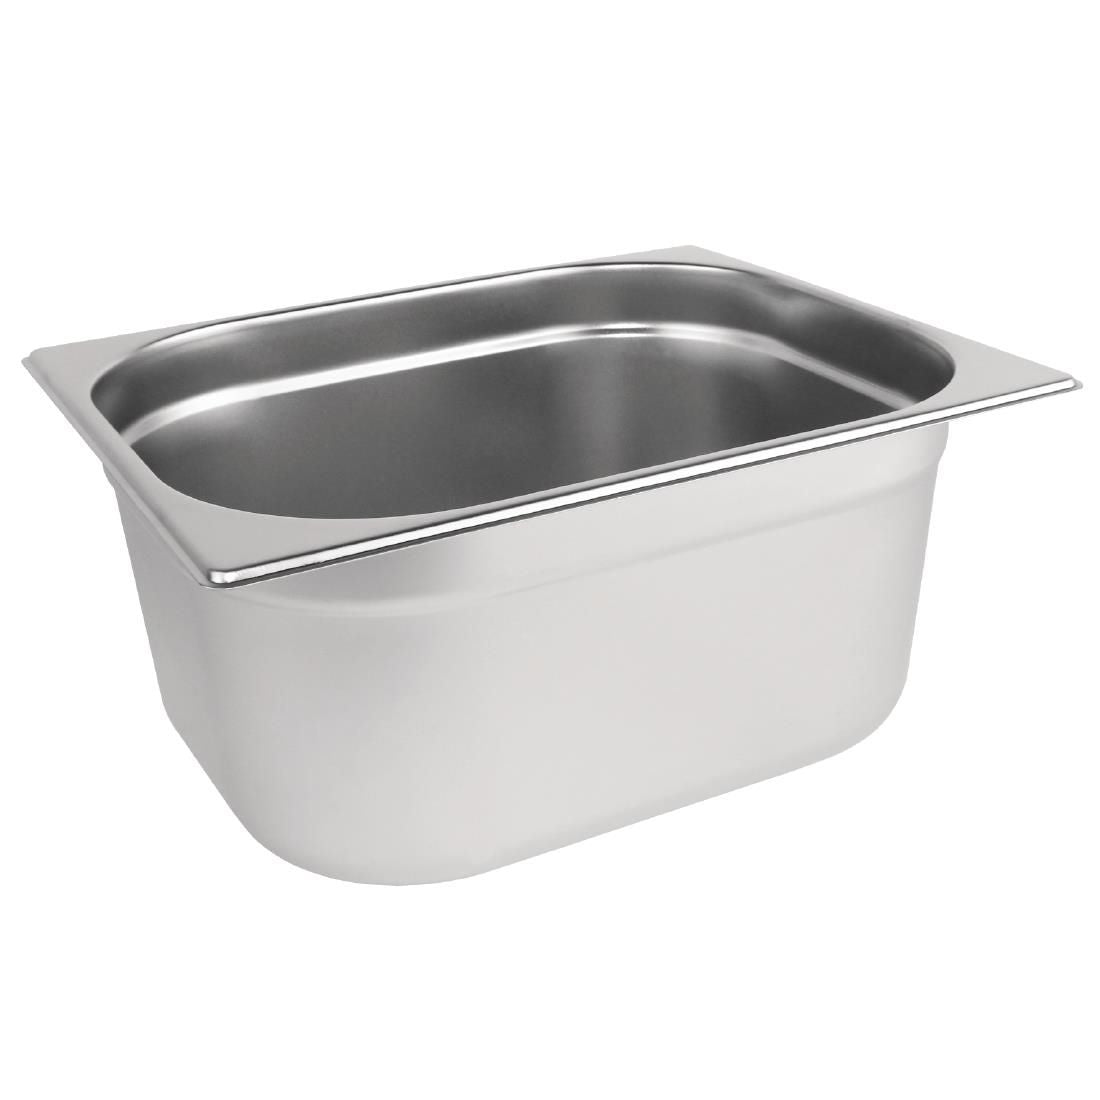 K930 Vogue Stainless Steel 1/2 Gastronorm Pan 150mm